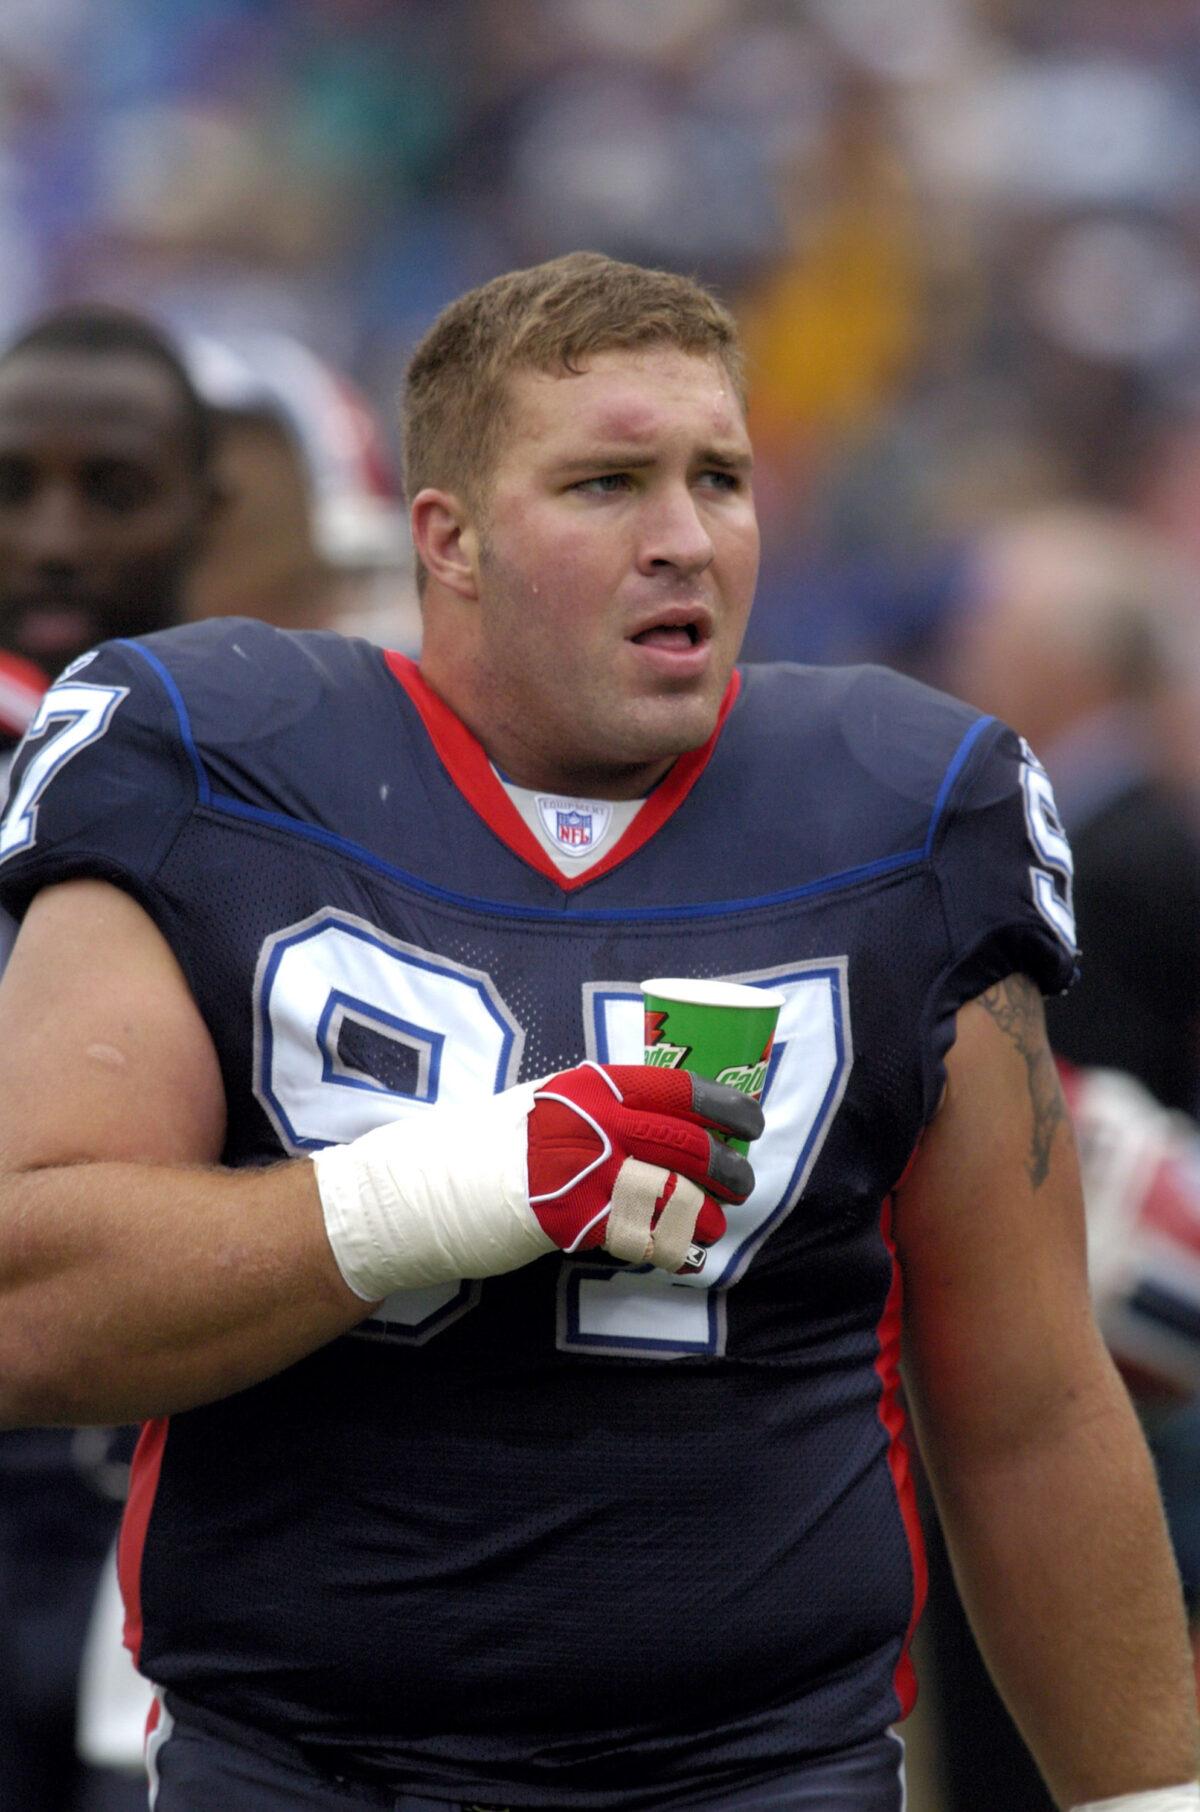 Buffalo Bills defensive lineman Justin Bannan on the sideline during a 2005 game. (Mark Konezny/NFLPhotoLibrary)